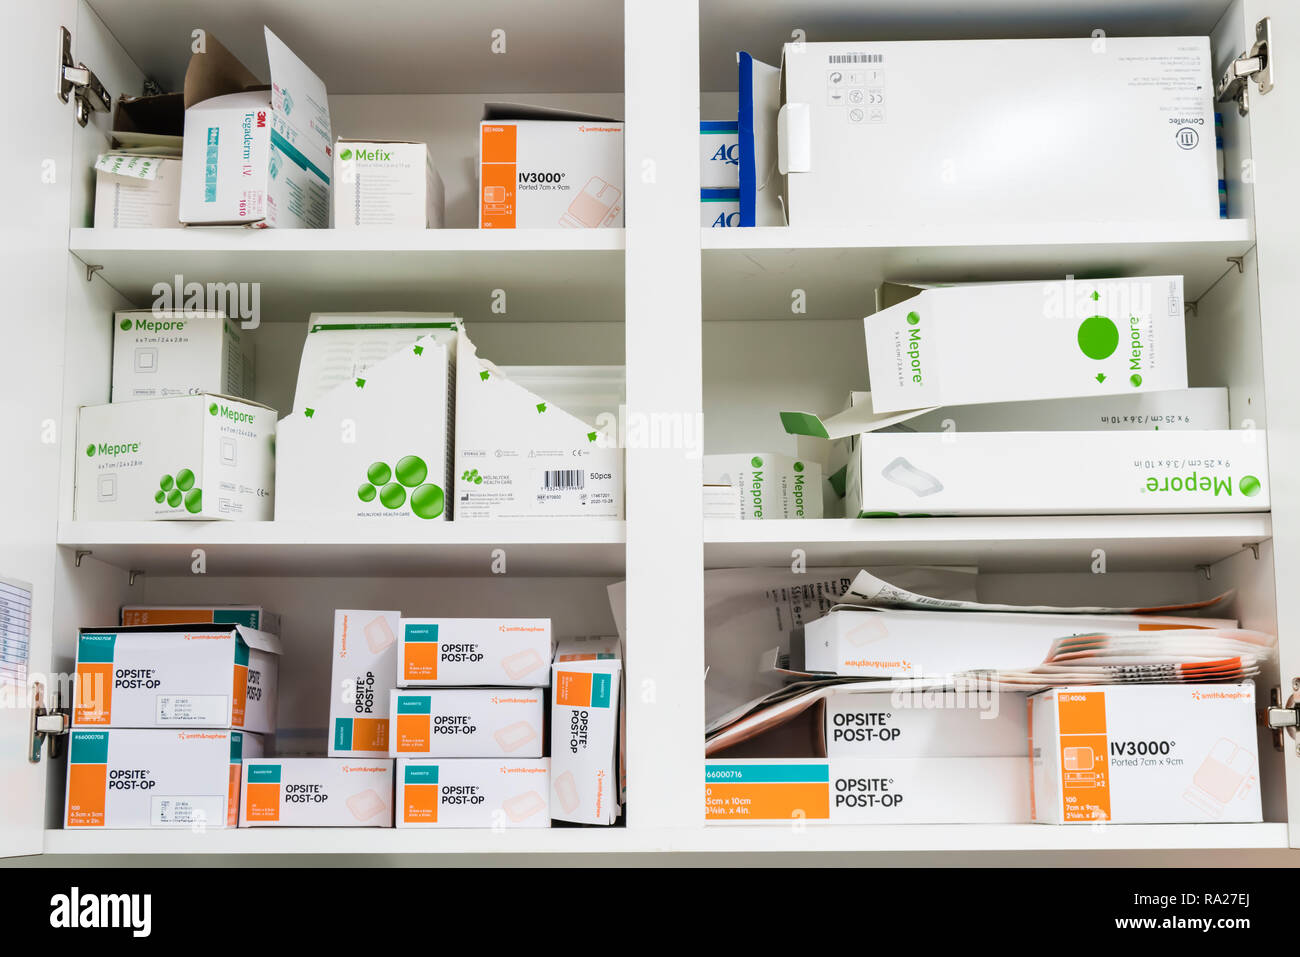 Cupboard in a hospital treatment room containing dressings including Opsite and Mepore post-surgical dressings Stock Photo